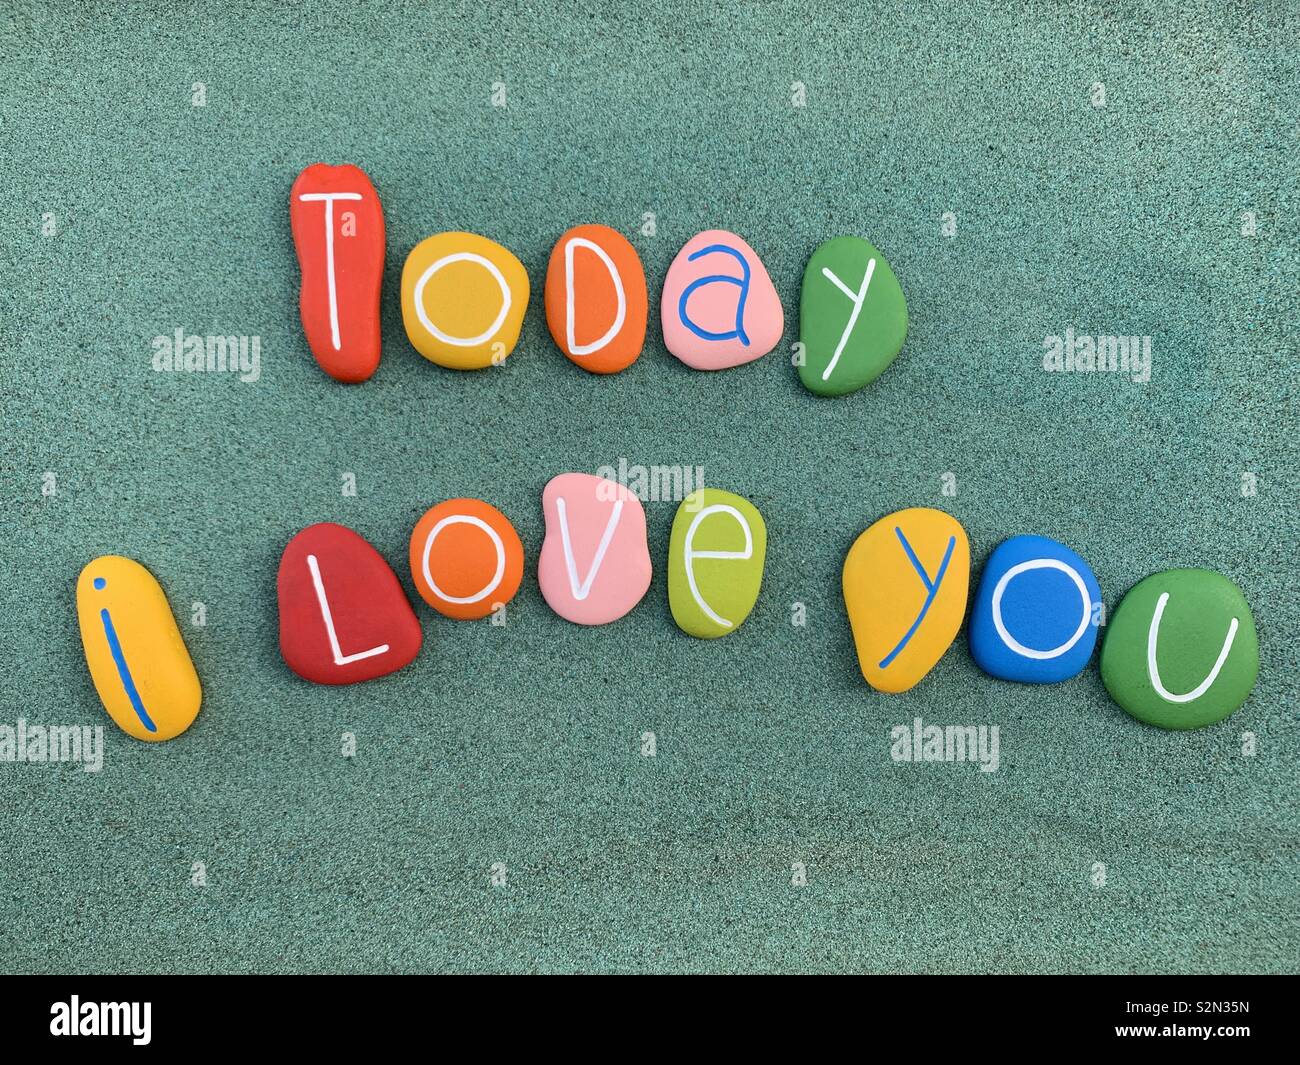 Today I love you Stock Photo